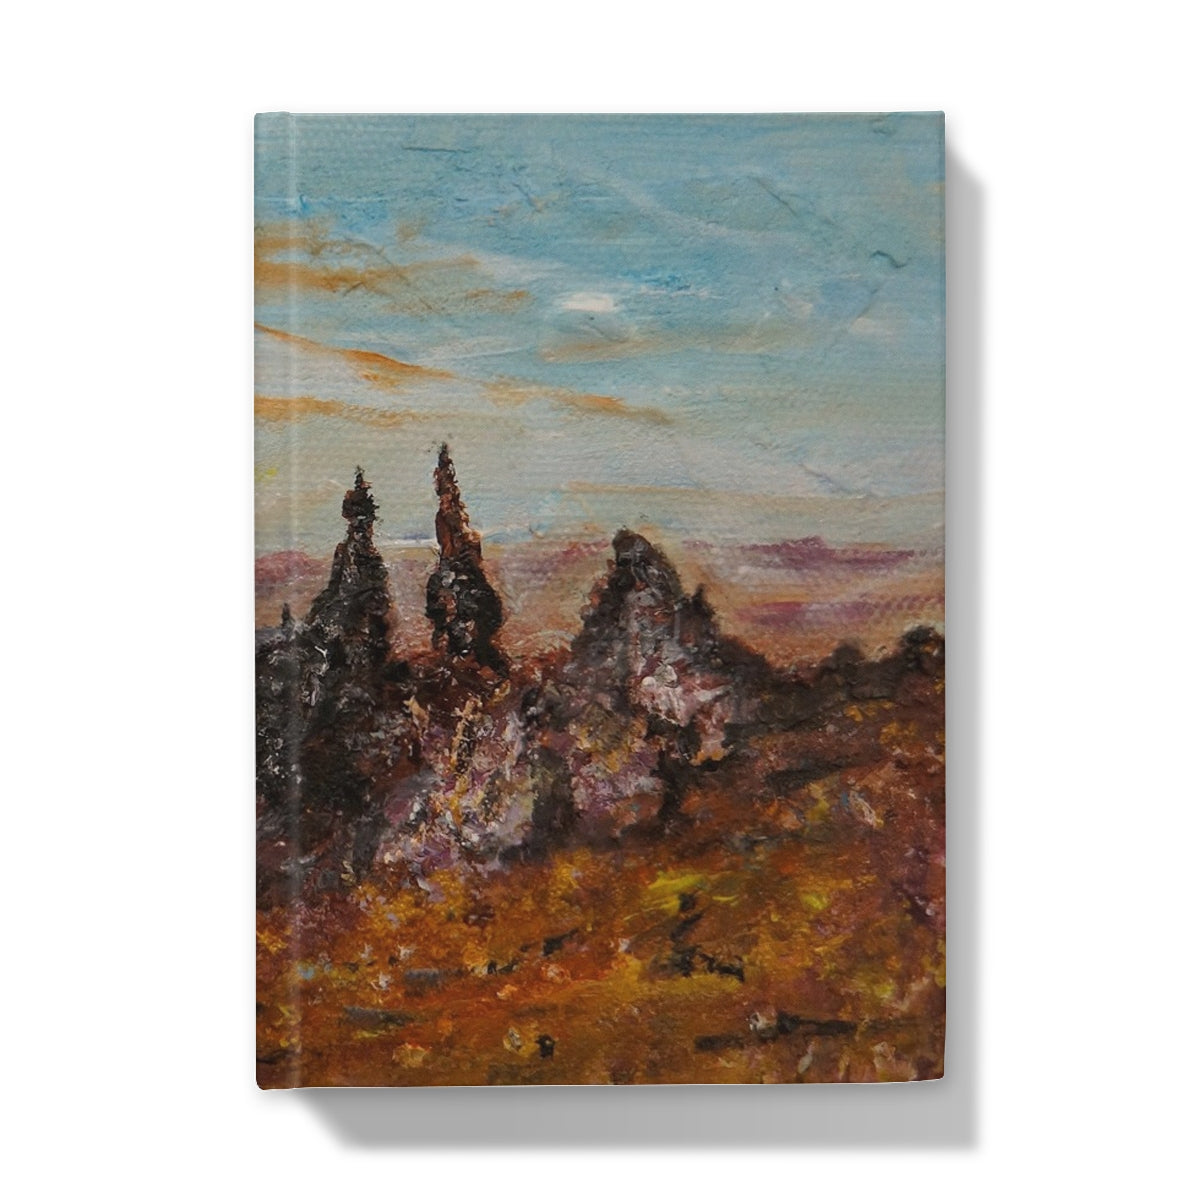 The Old Man Of Storr Skye Art Gifts Hardback Journal-Journals & Notebooks-Skye Art Gallery-A4-Plain-Paintings, Prints, Homeware, Art Gifts From Scotland By Scottish Artist Kevin Hunter